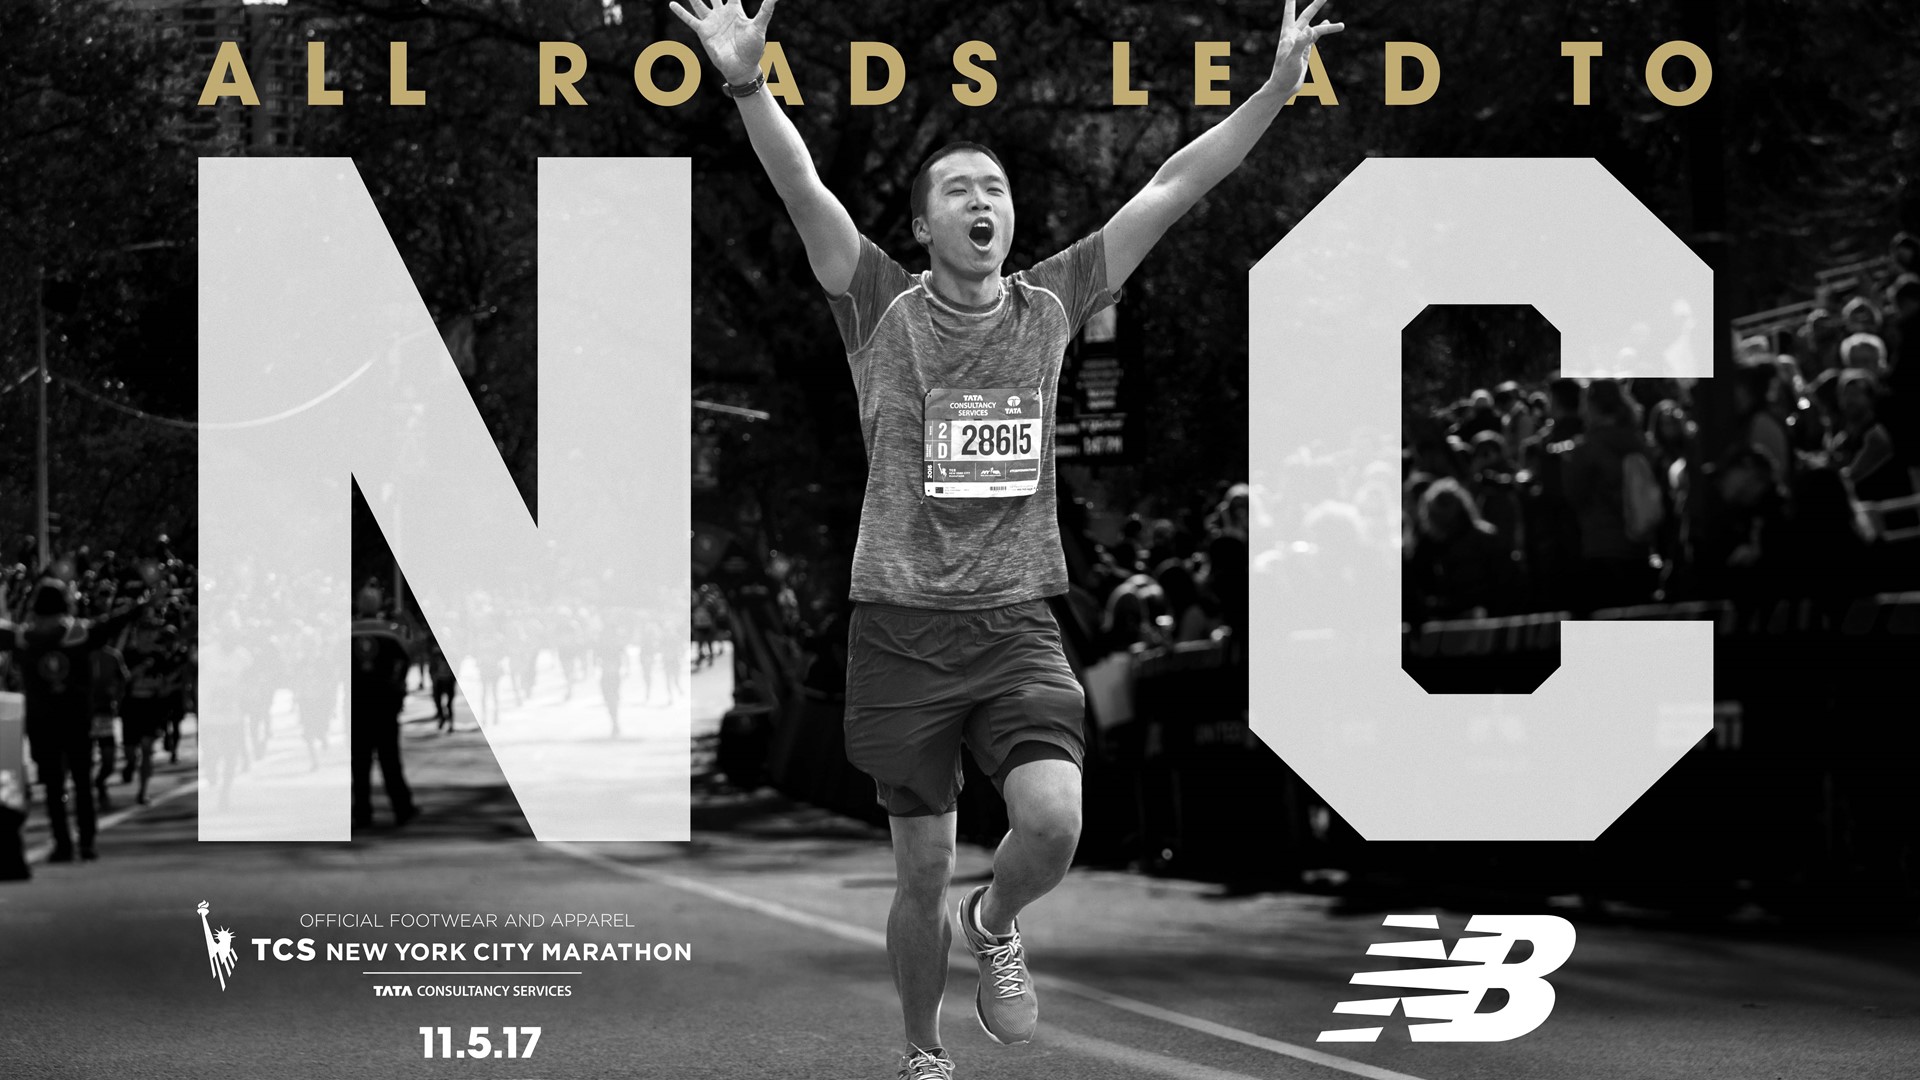 All Roads Lead to NYC 10